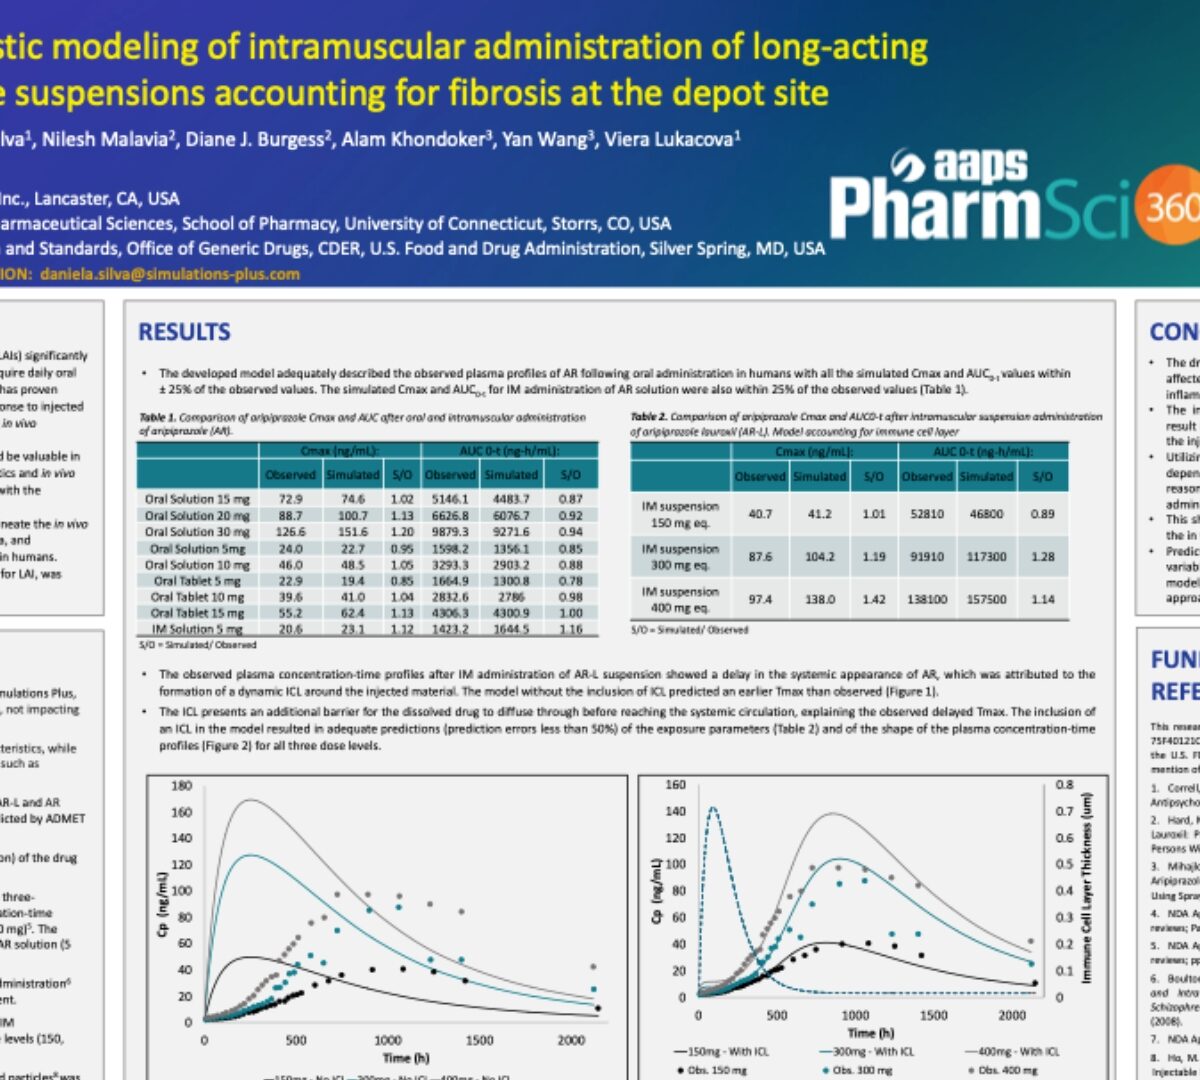 Mechanistic modeling of intramuscular administration of long-acting injectable suspensions accounting for fibrosis at the depot site